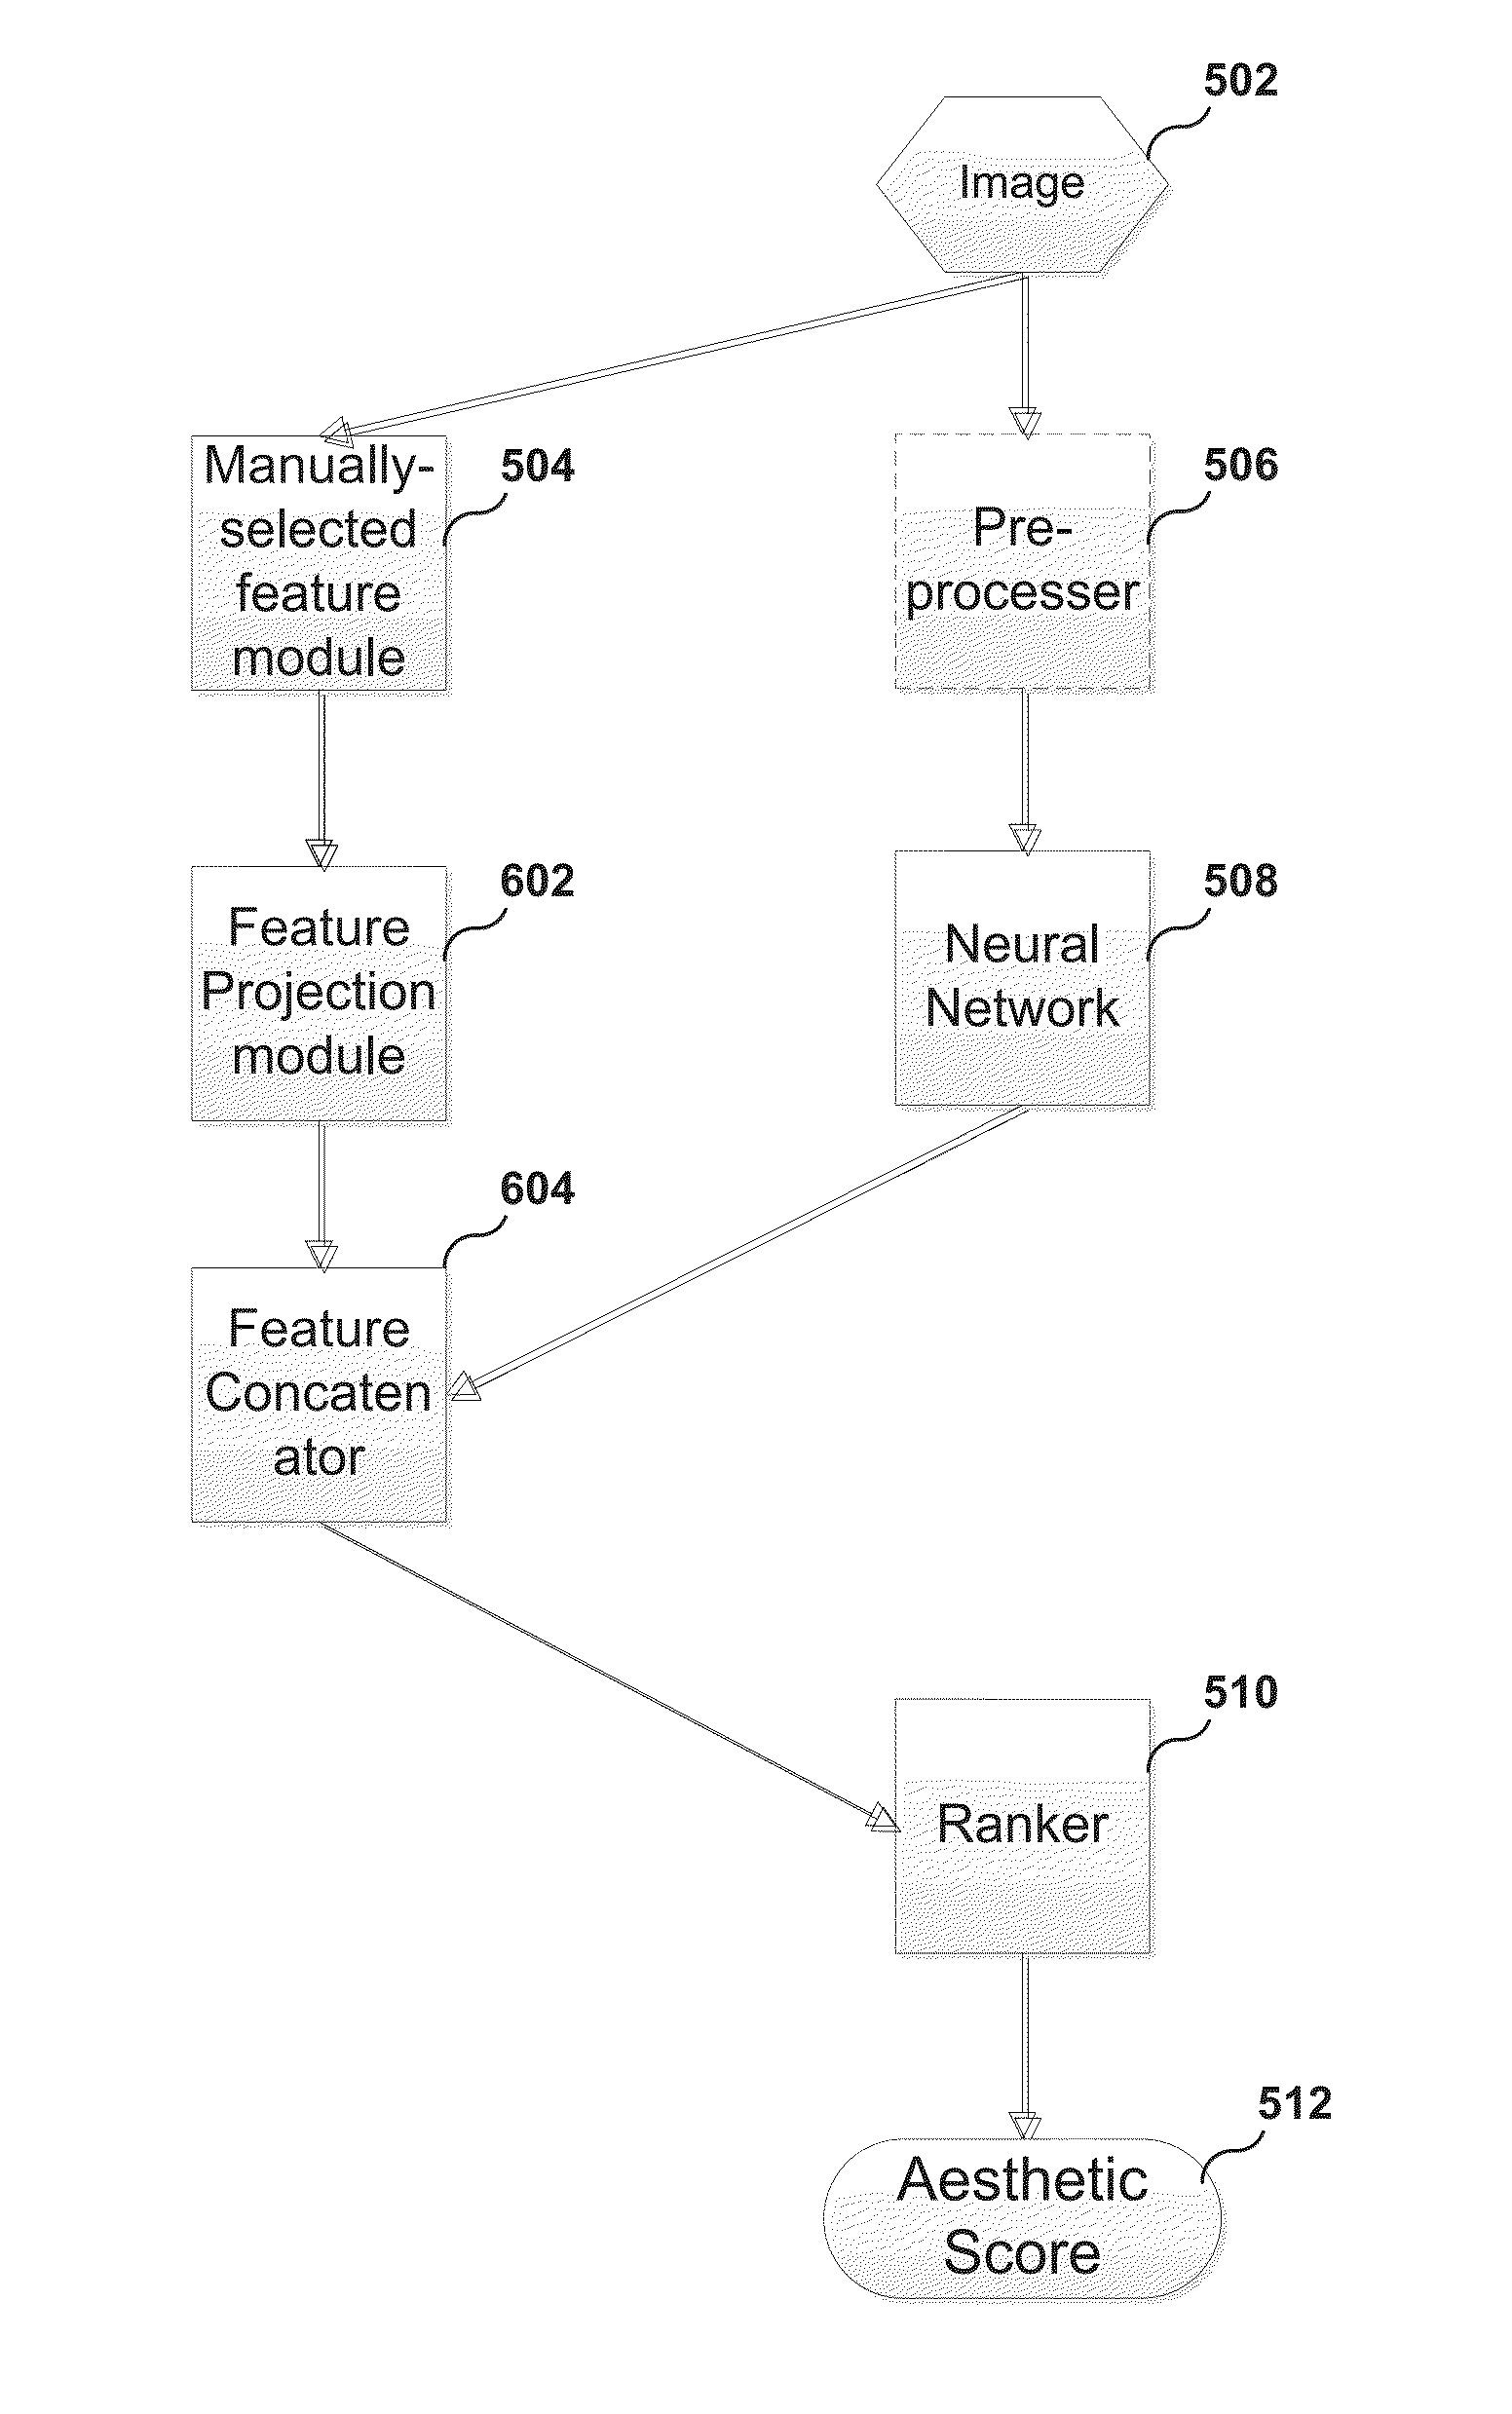 Systems, methods, and computer program products for searching and sorting images by aesthetic quality